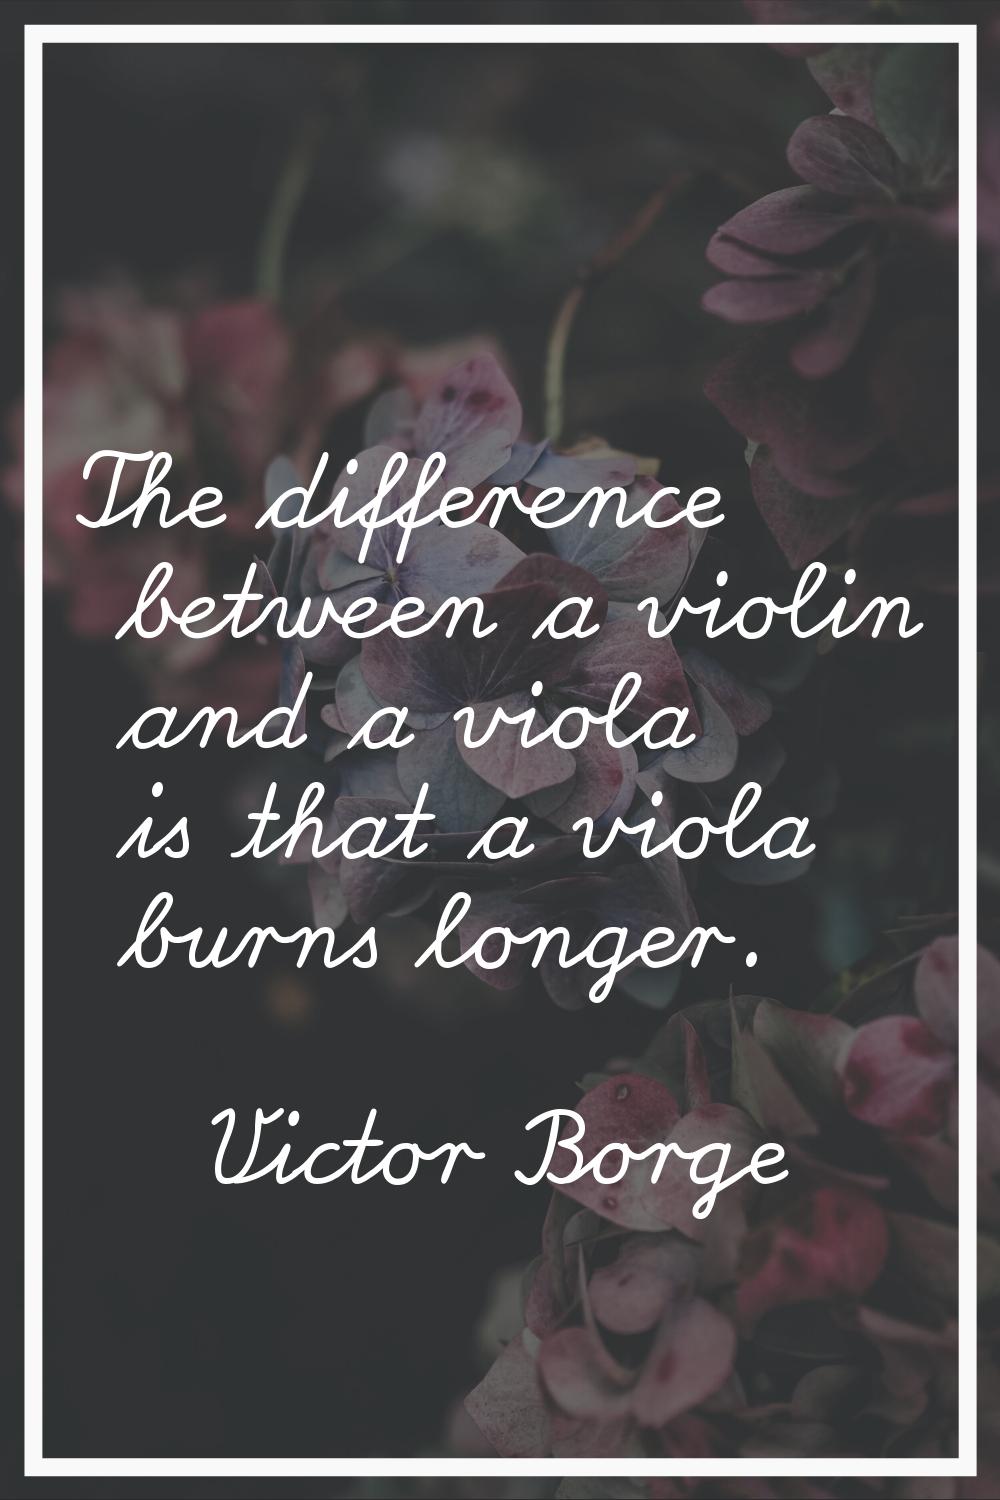 The difference between a violin and a viola is that a viola burns longer.